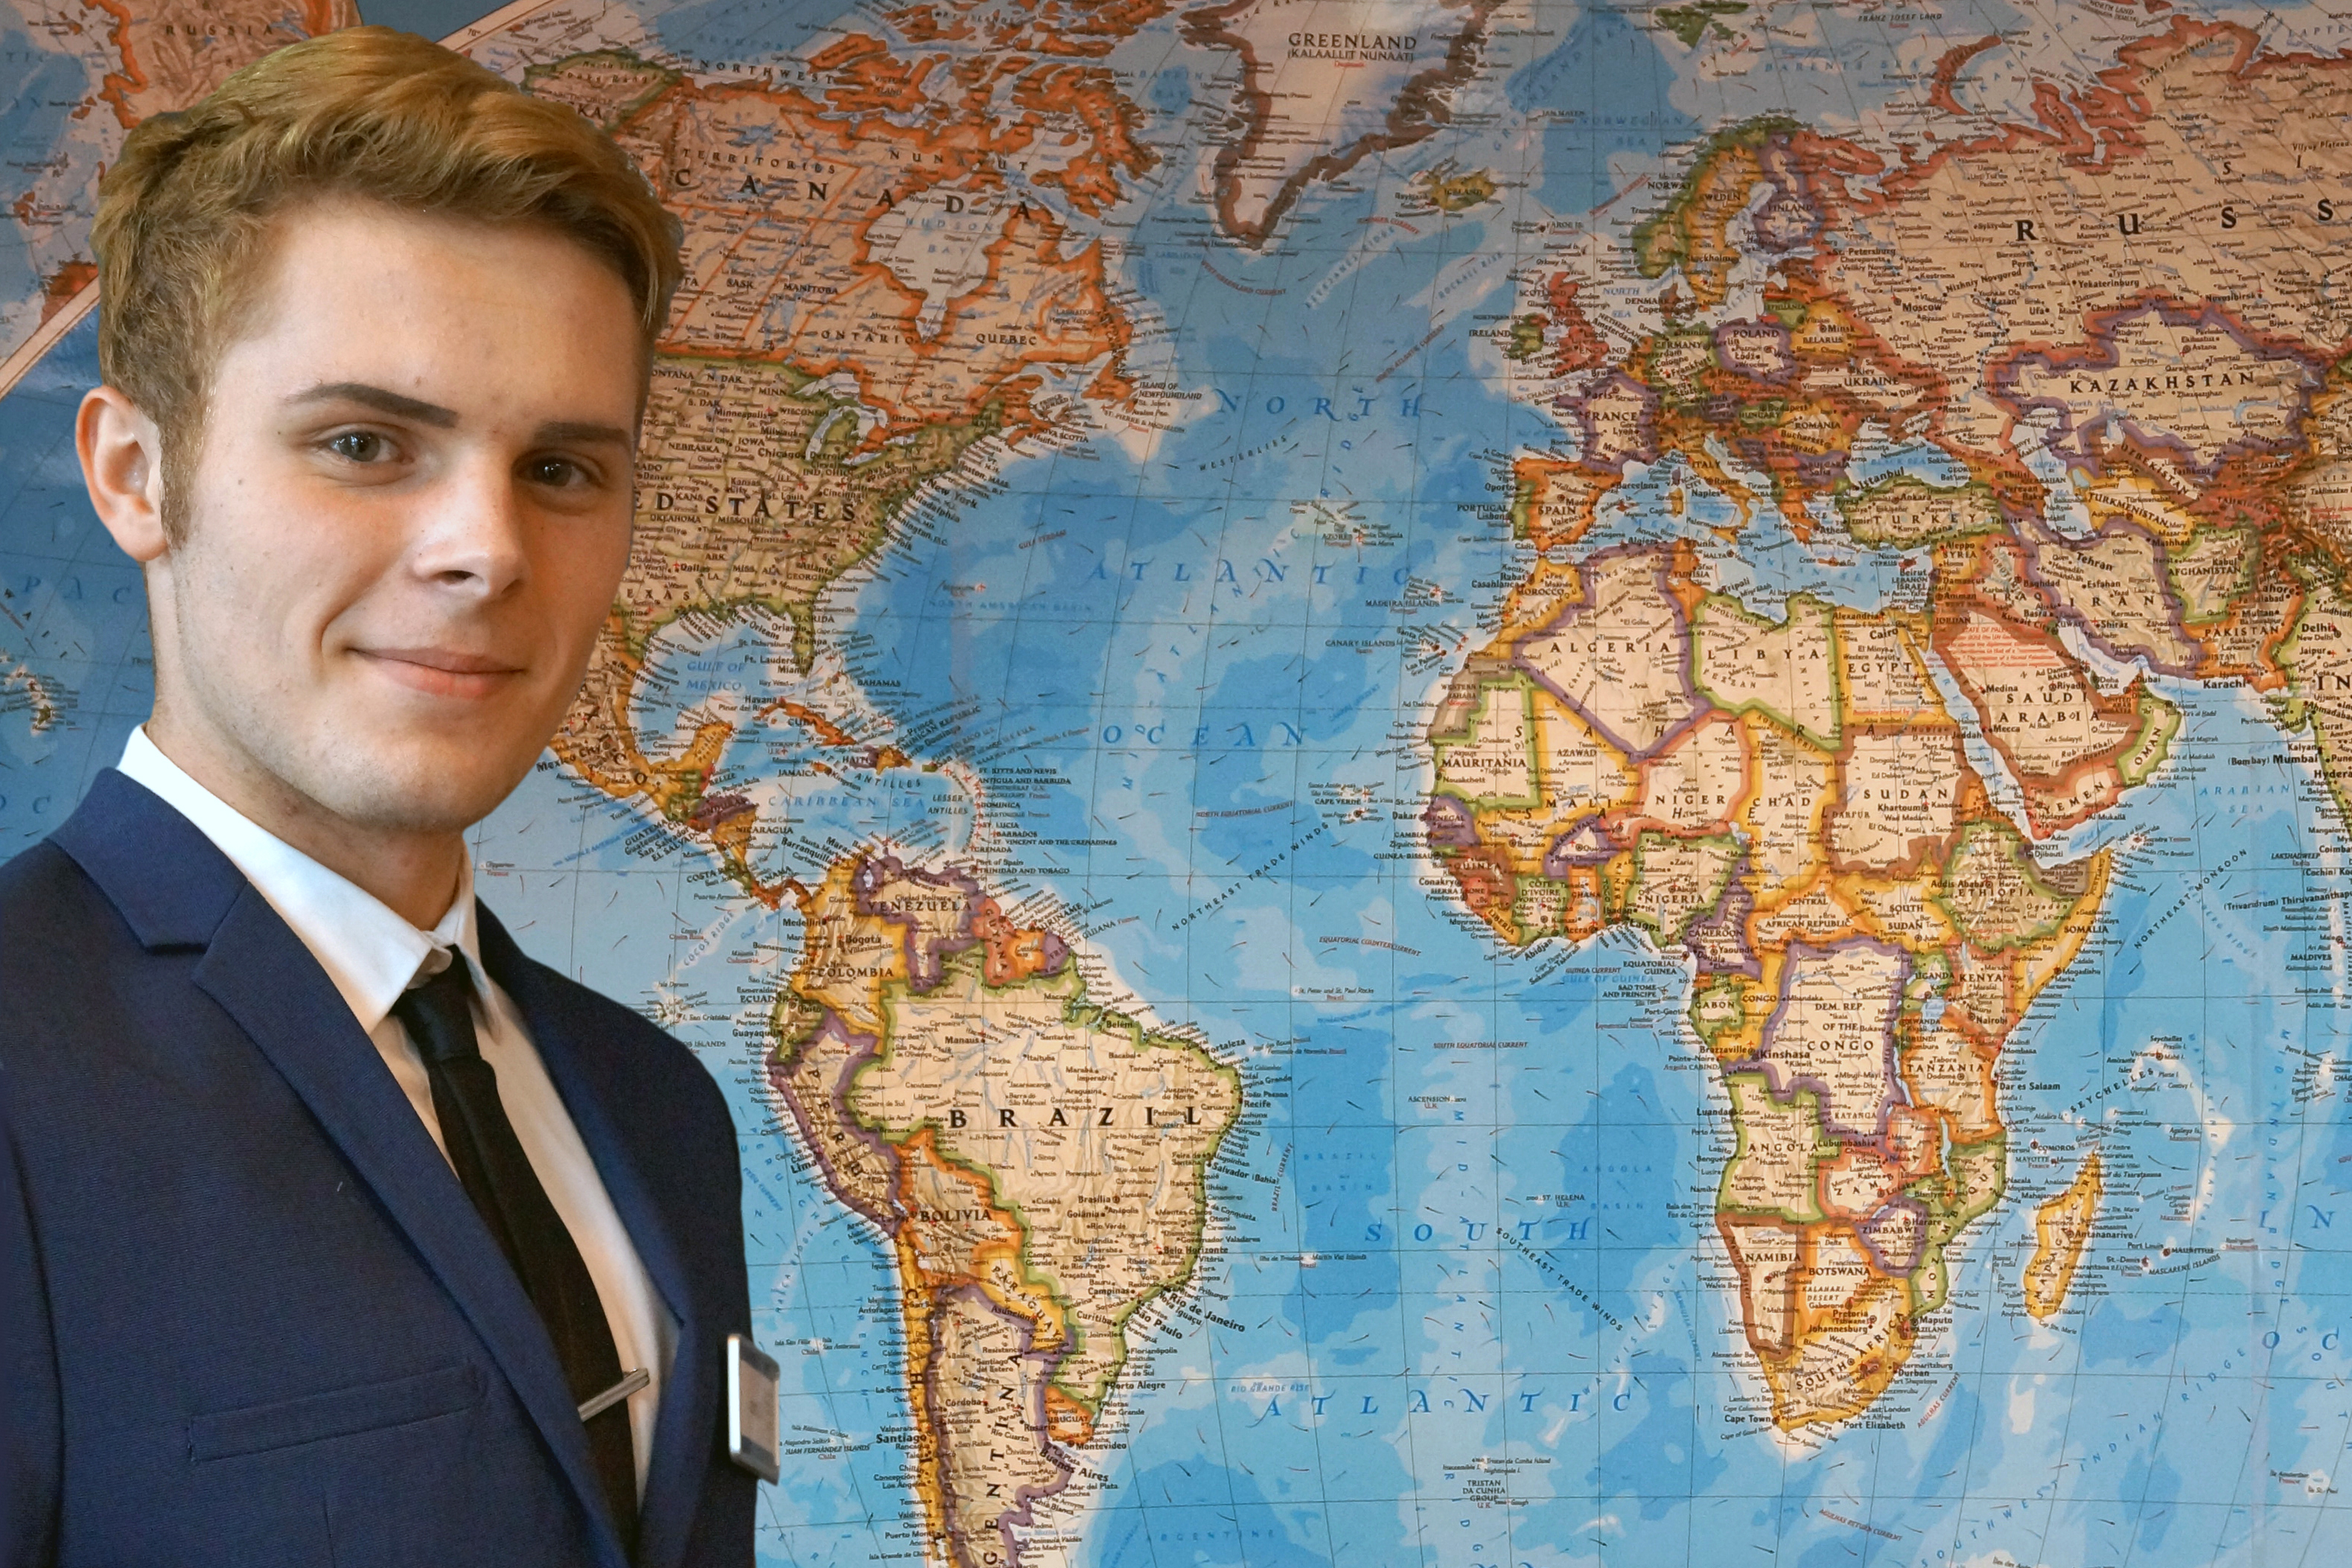 STUDENT IN UNIFORM IN FRONT OF WORLD MAP